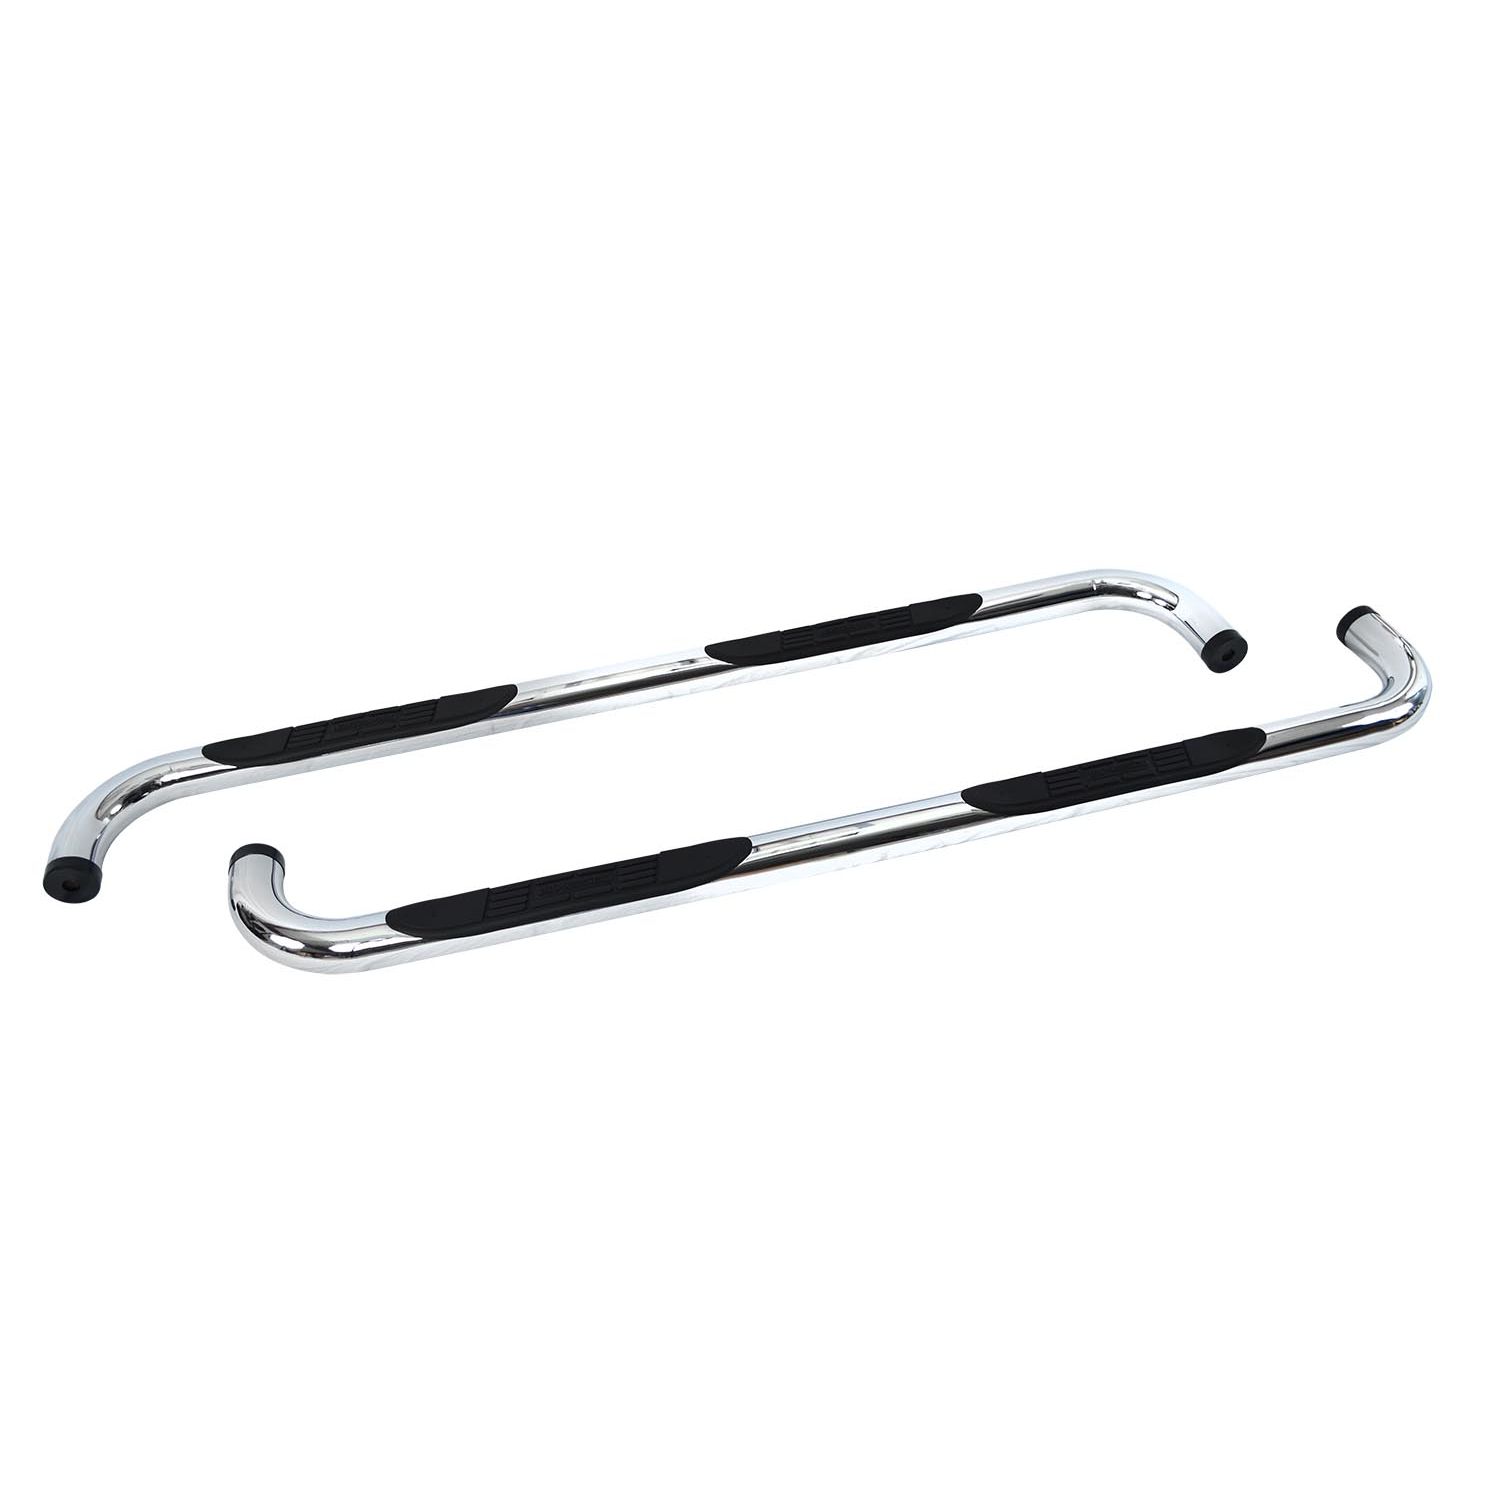 Go Rhino 4239PS - 4000 Series Side Steps with Mounting Brackets Kit - Polished Stainless Steel